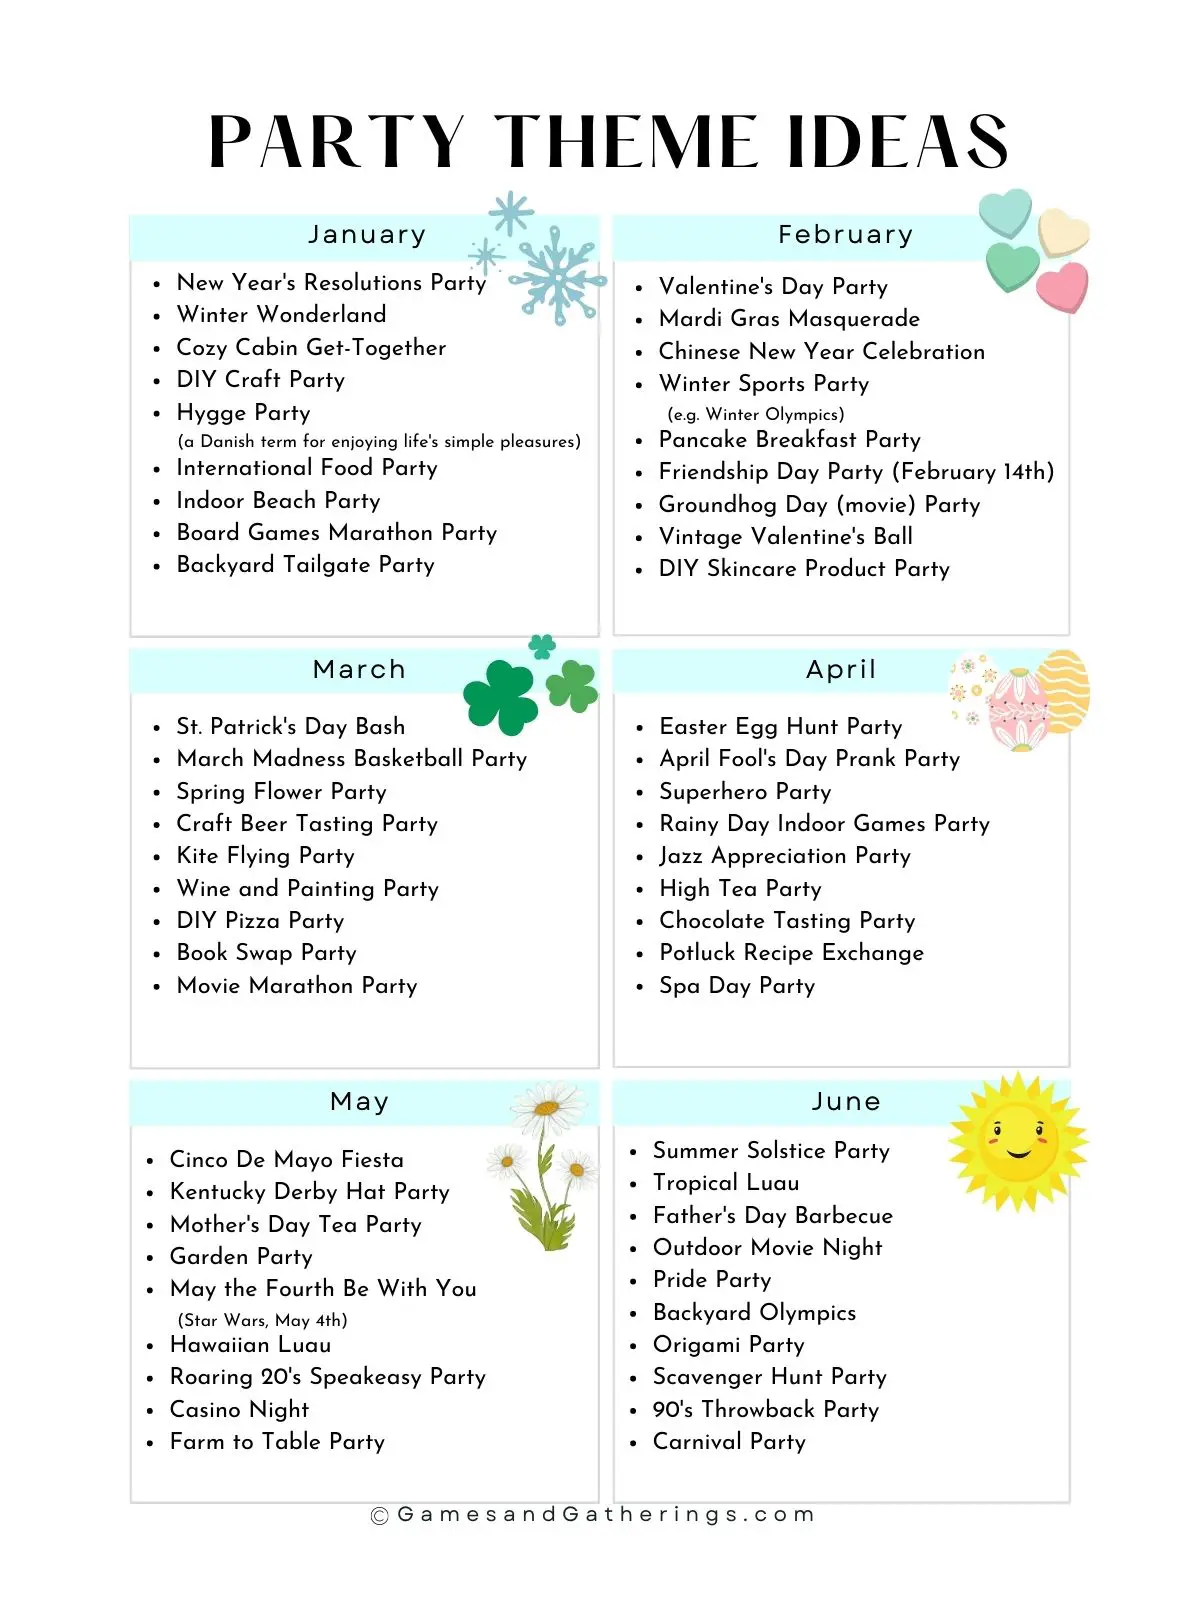 A party planning ideas printable.